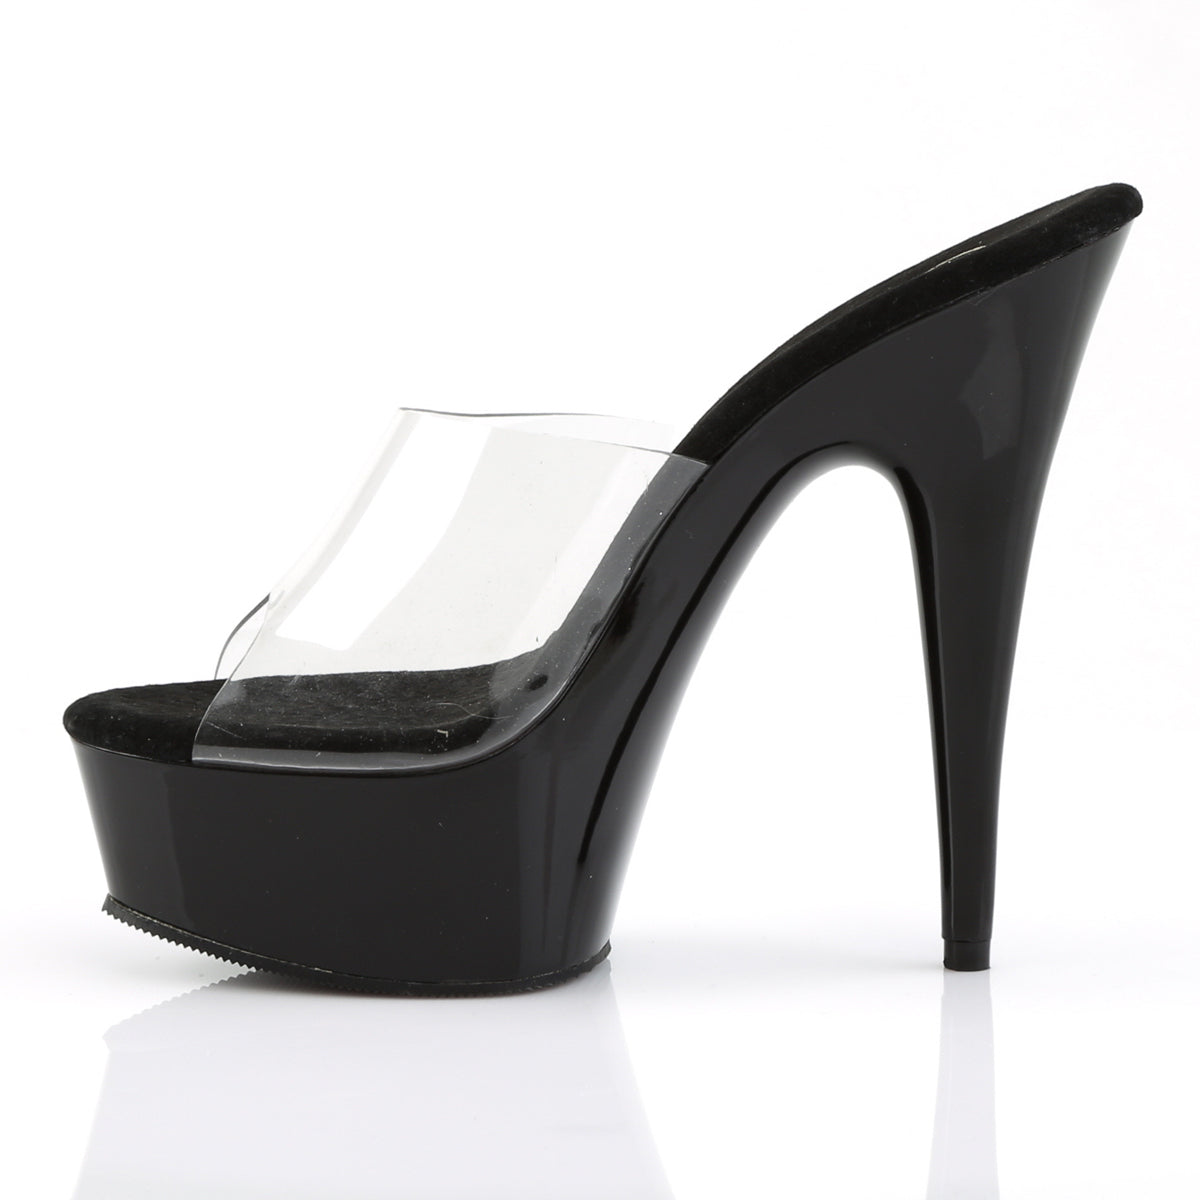 DELIGHT-601 6" Heel Clear and Black Pole Dancing Platforms-Pleaser- Sexy Shoes Pole Dance Heels